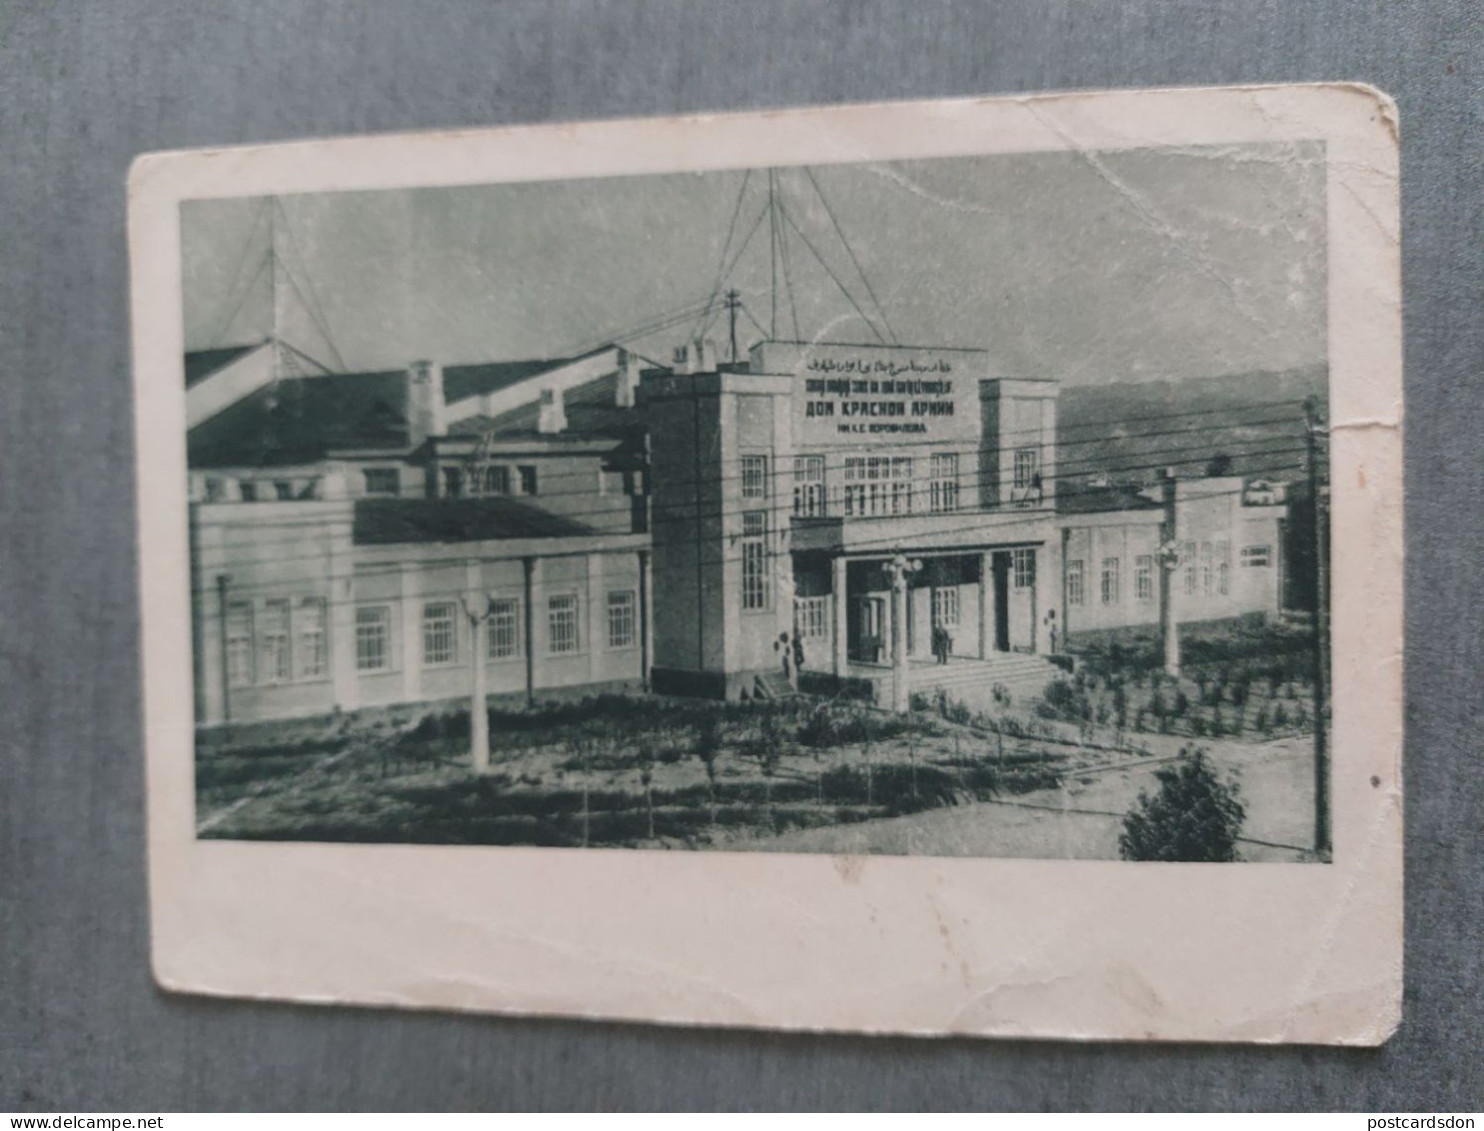 Tajikistan. STALINABAD CITY (DUSHANBE). Red Army House - CONSTRUCTIVISM - Old USSR PC. 1932 -  Rare! - Tayijistán